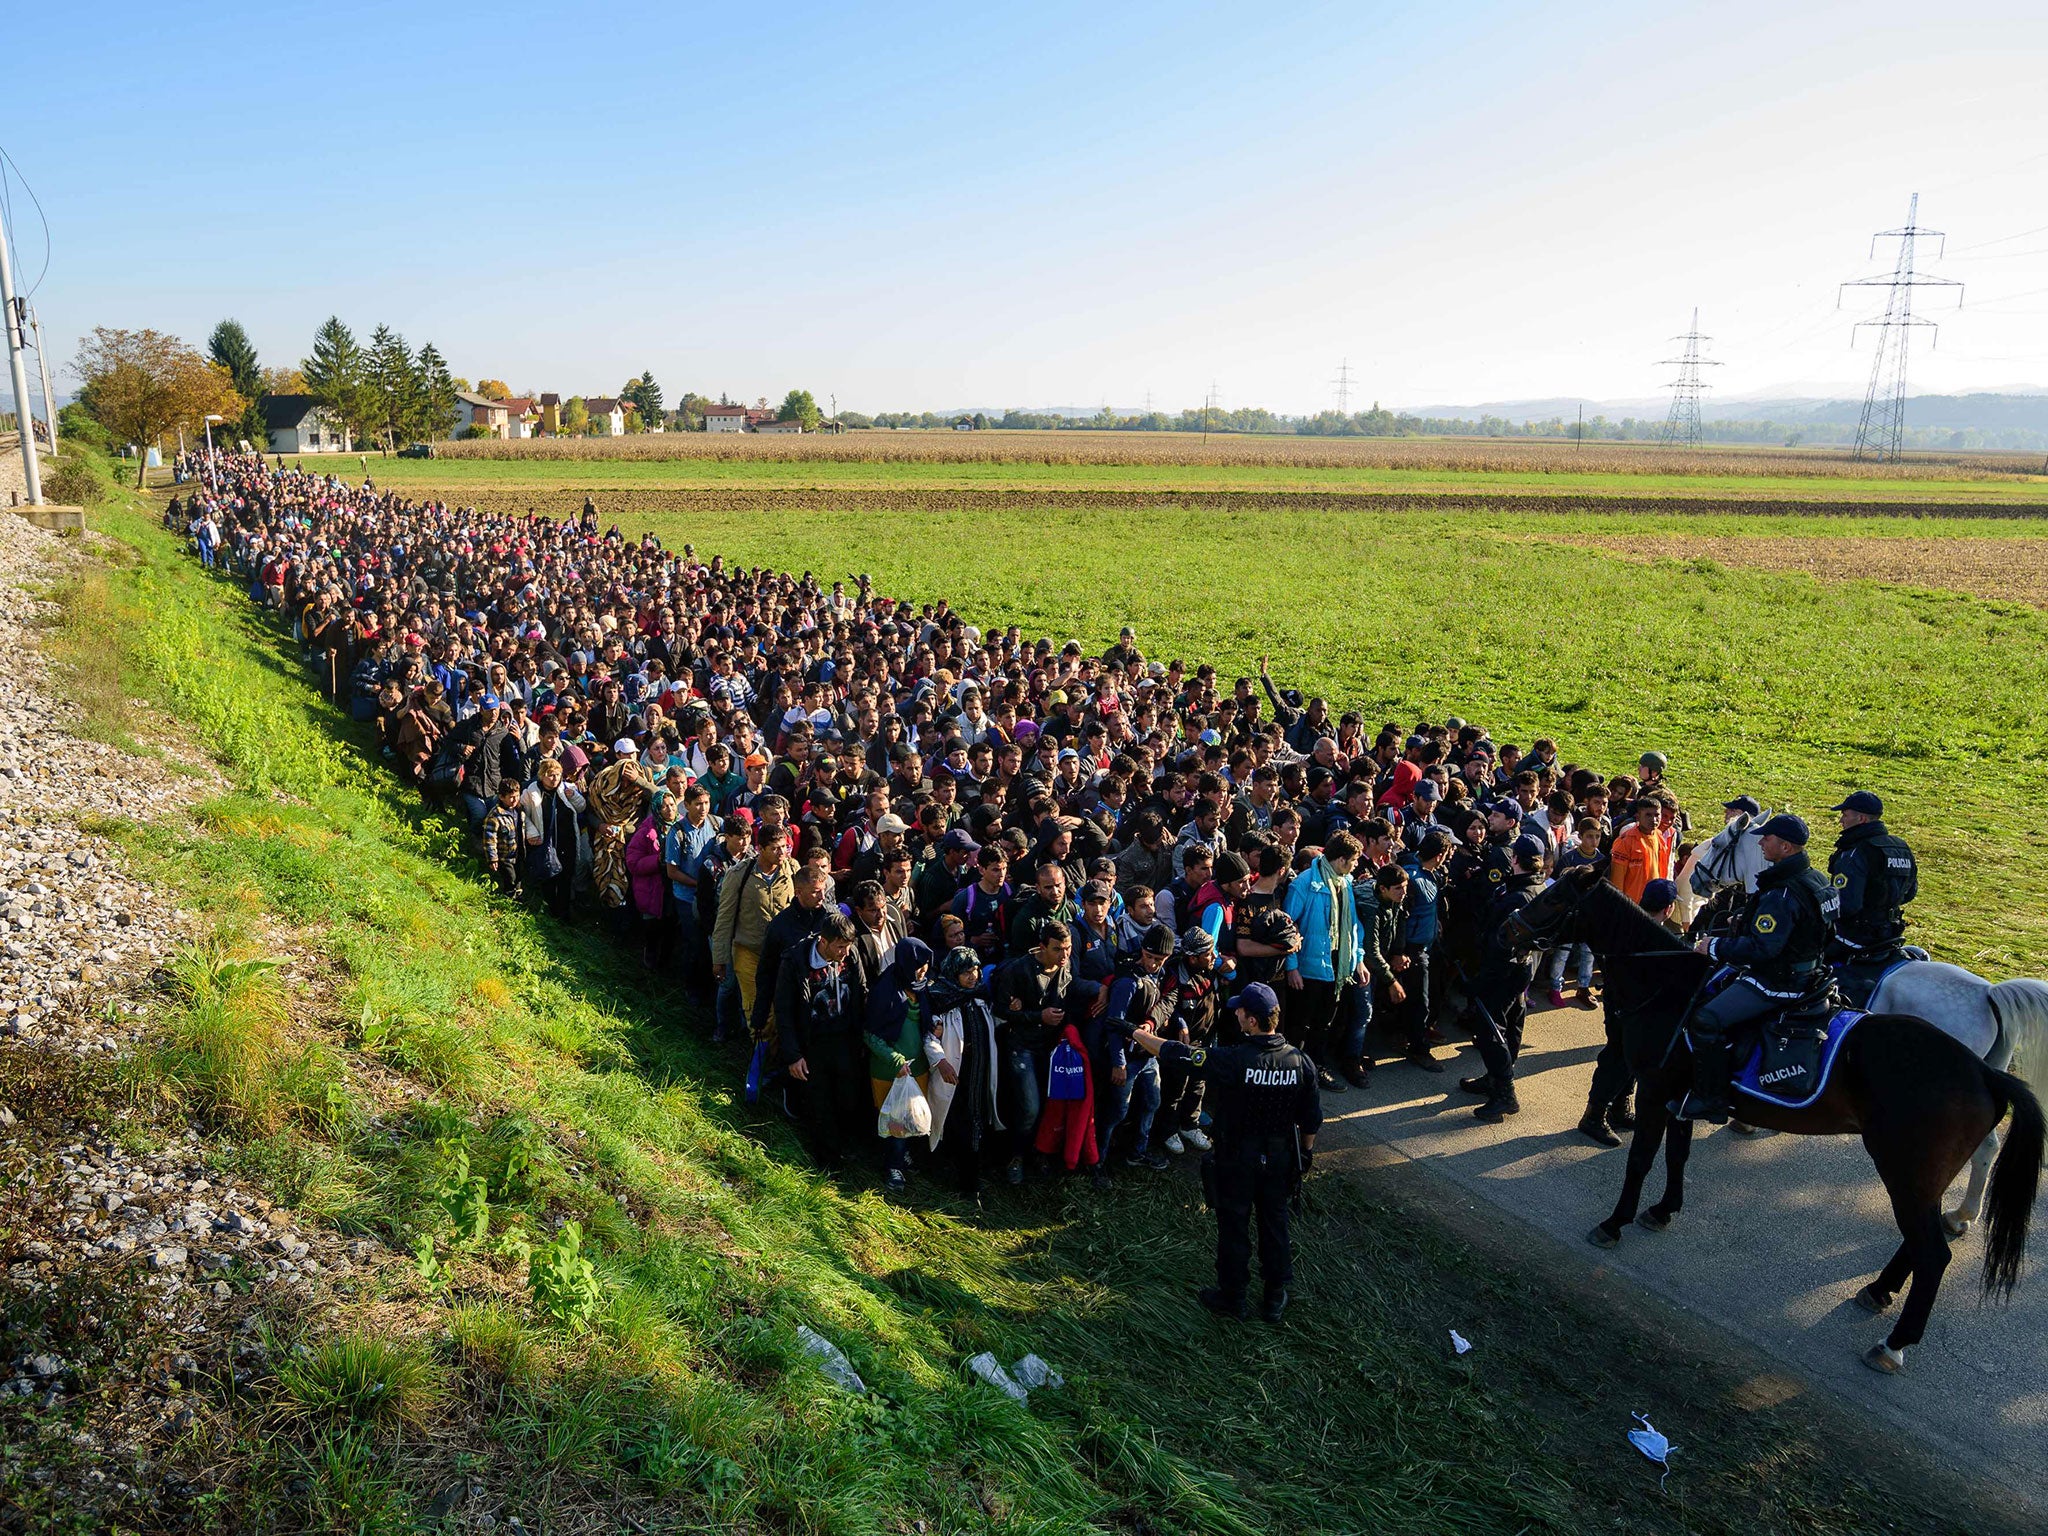 Hundreds of thousands of refugees have arrived in Europe over recent months